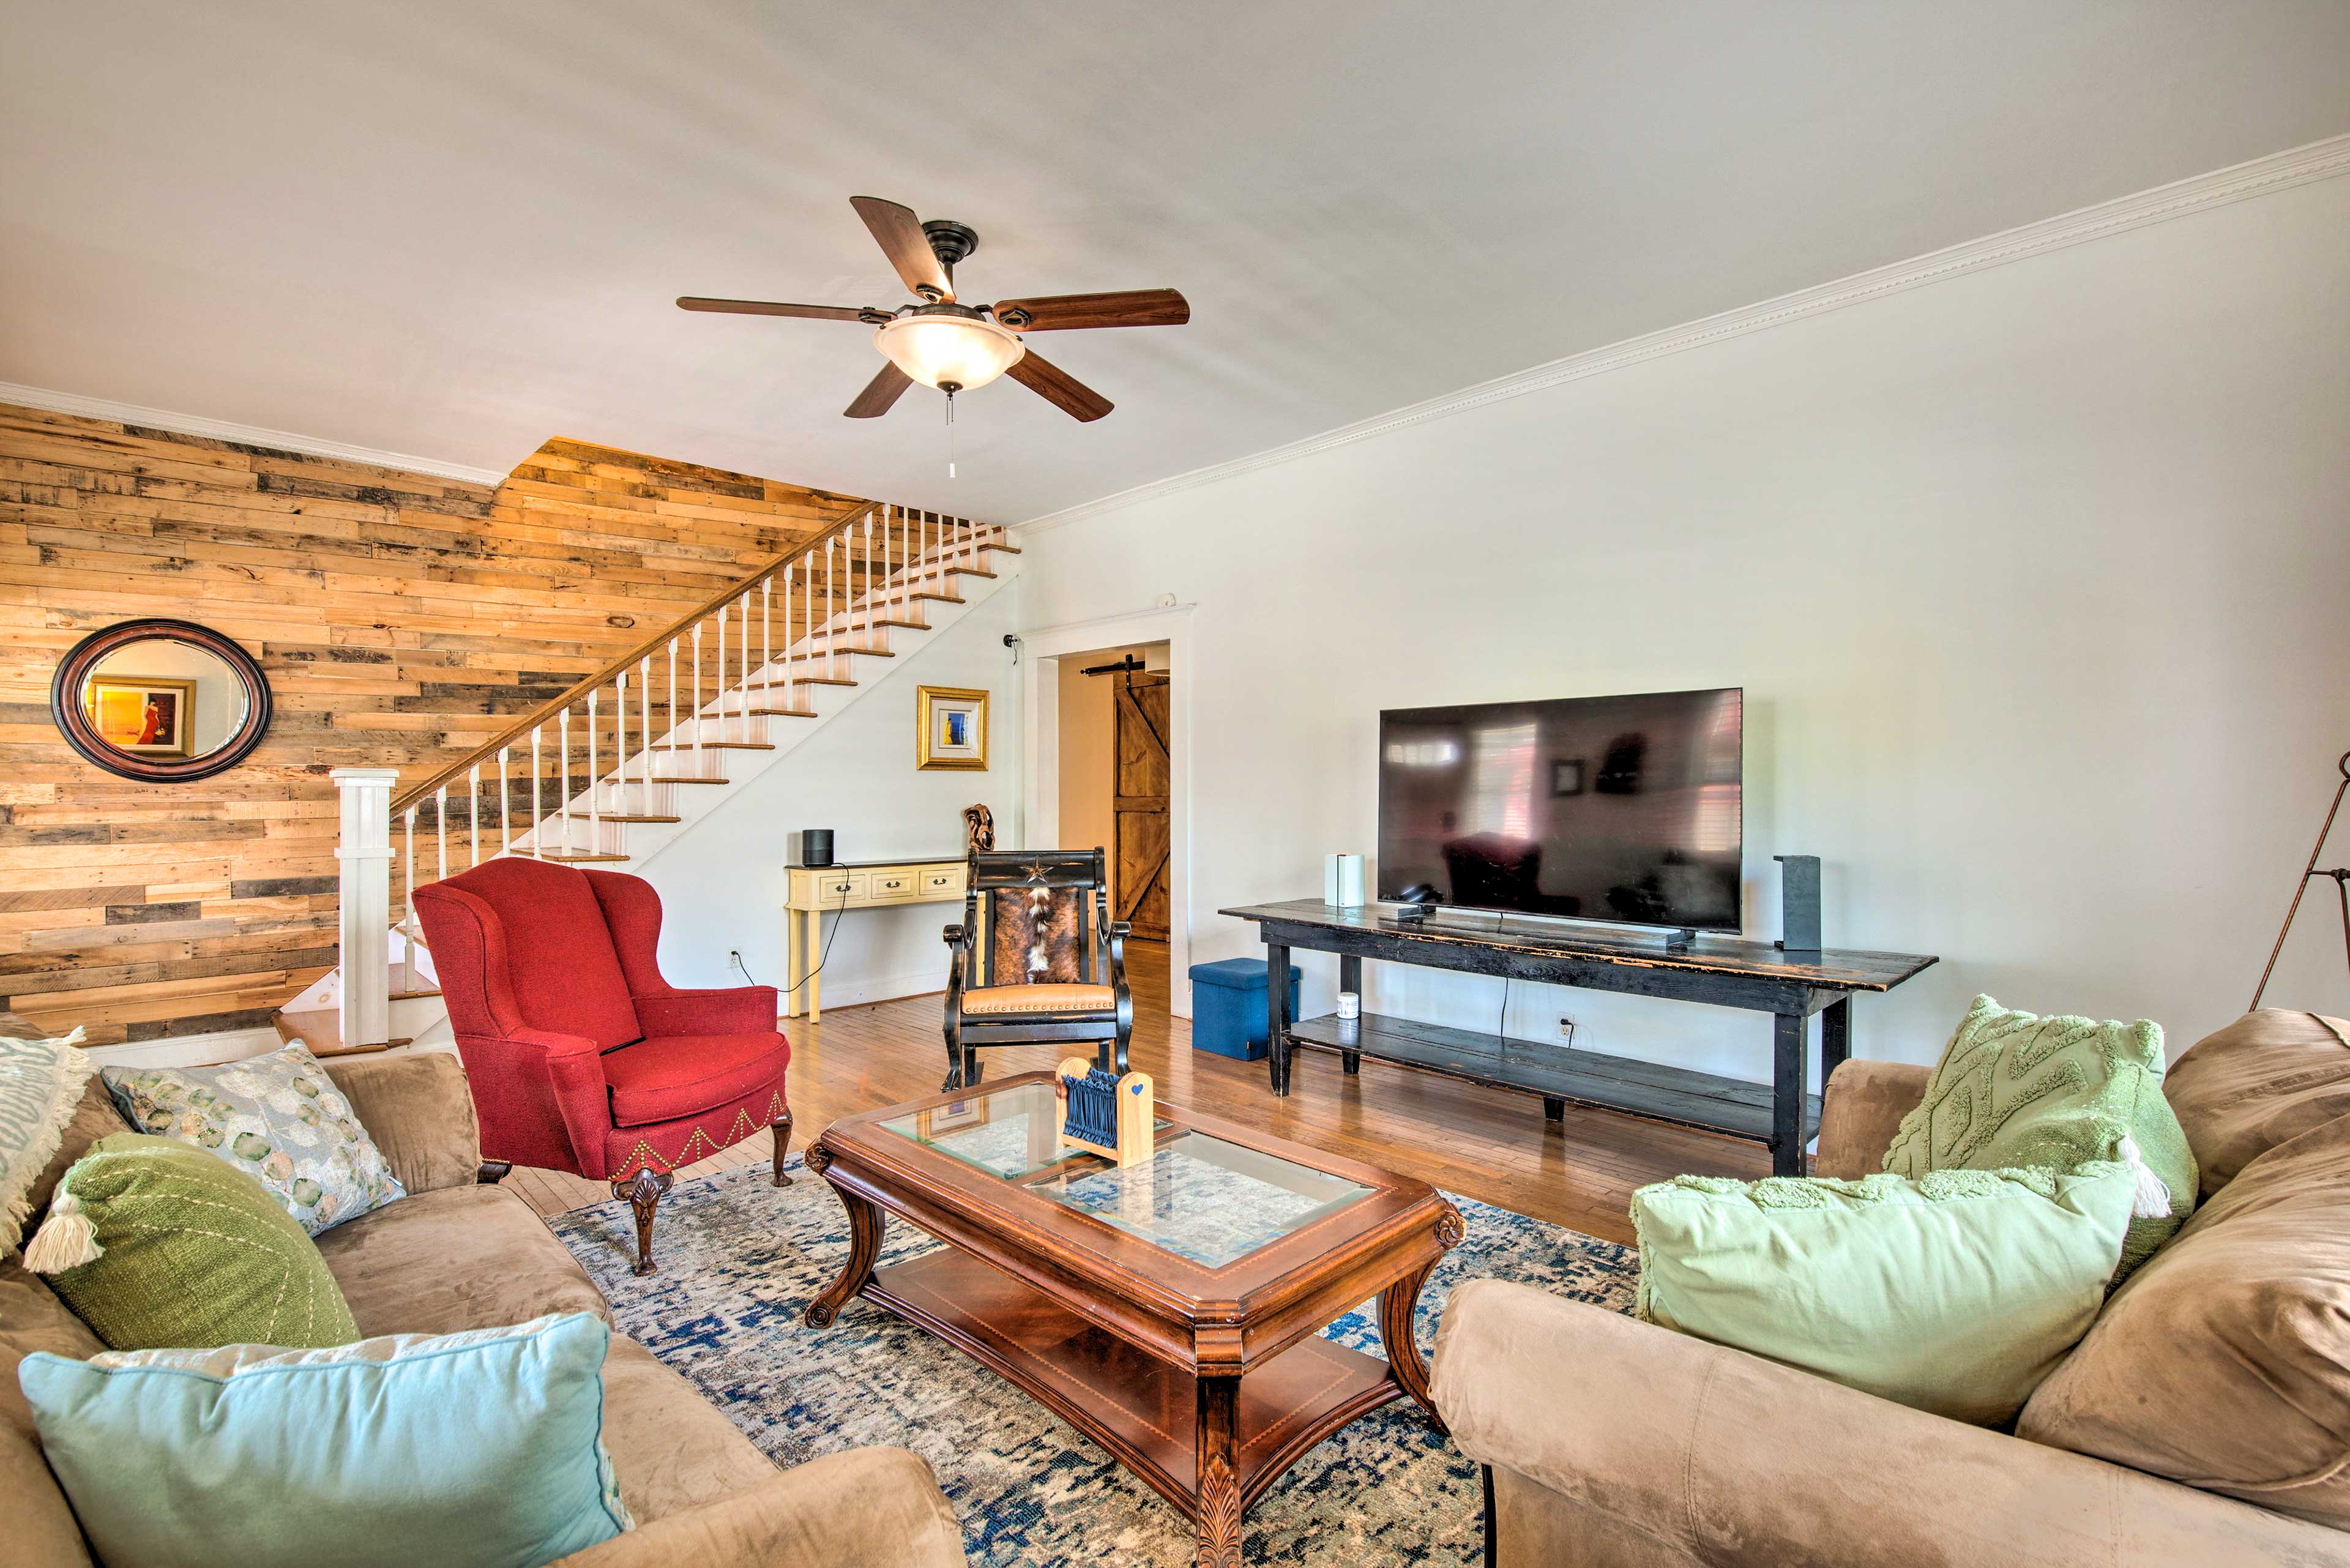 Atlanta Vacation Rental | 3BR | 3BA | 2,934 Sq Ft | Access Only By Stairs